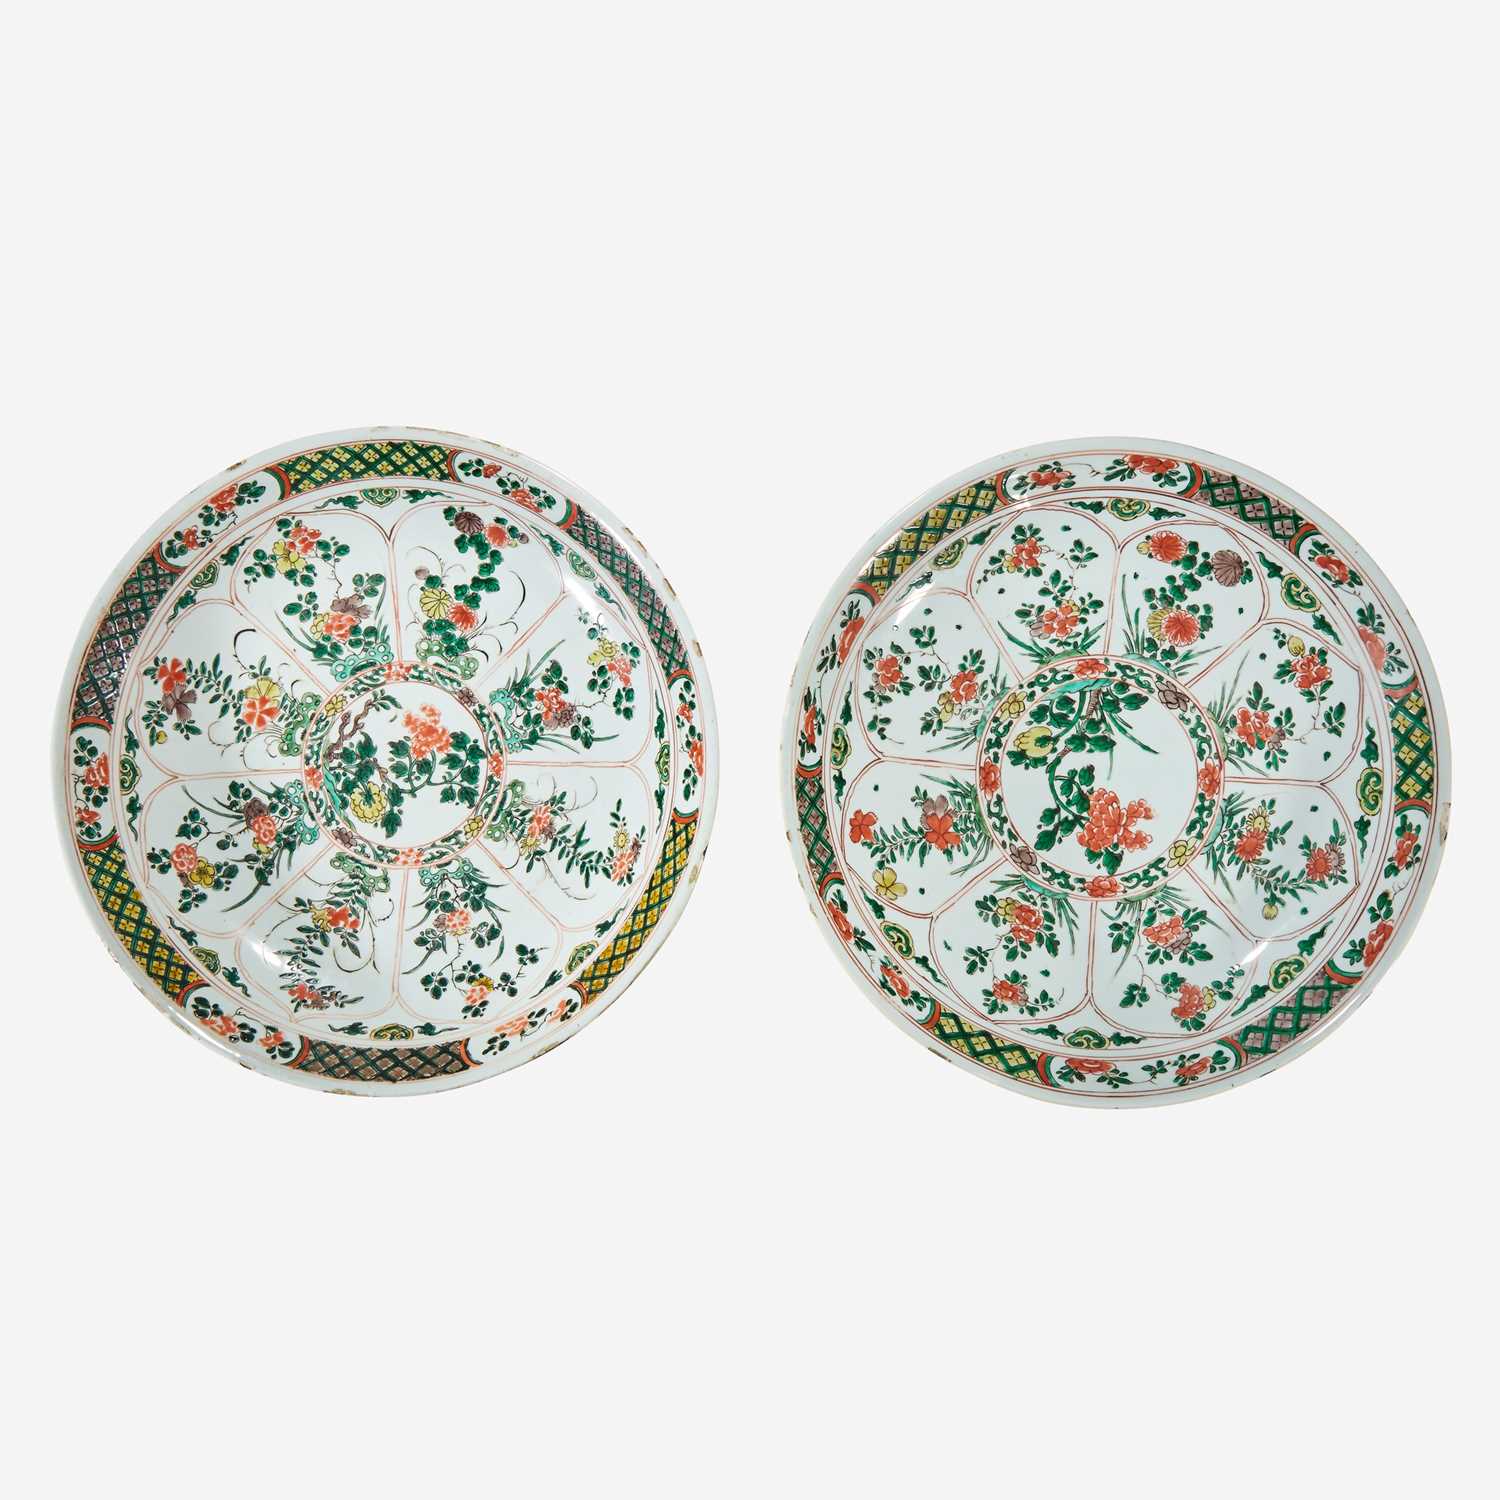 Lot 40 - Two similar Chinese famille verte-decorated porcelain large dishes